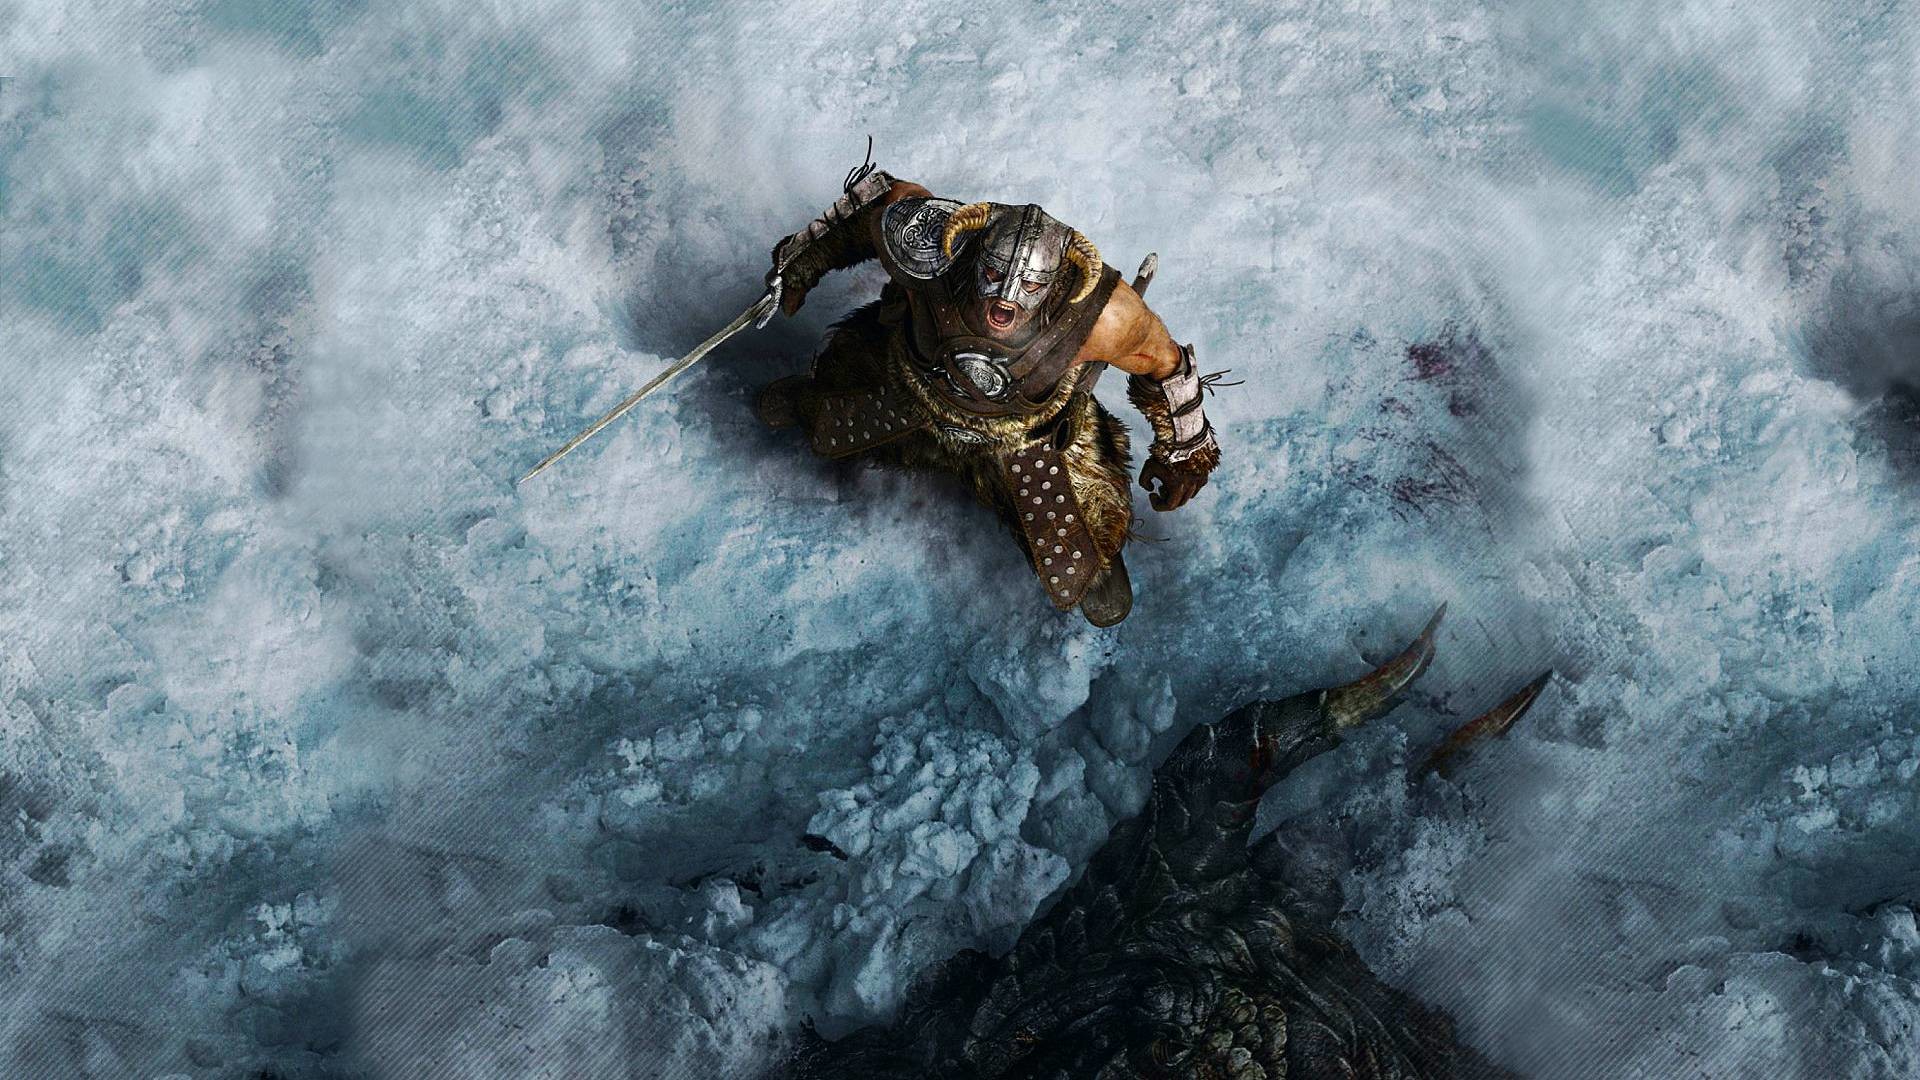 1920x1080 Wallpapers For > Skyrim Wallpapers 1080p